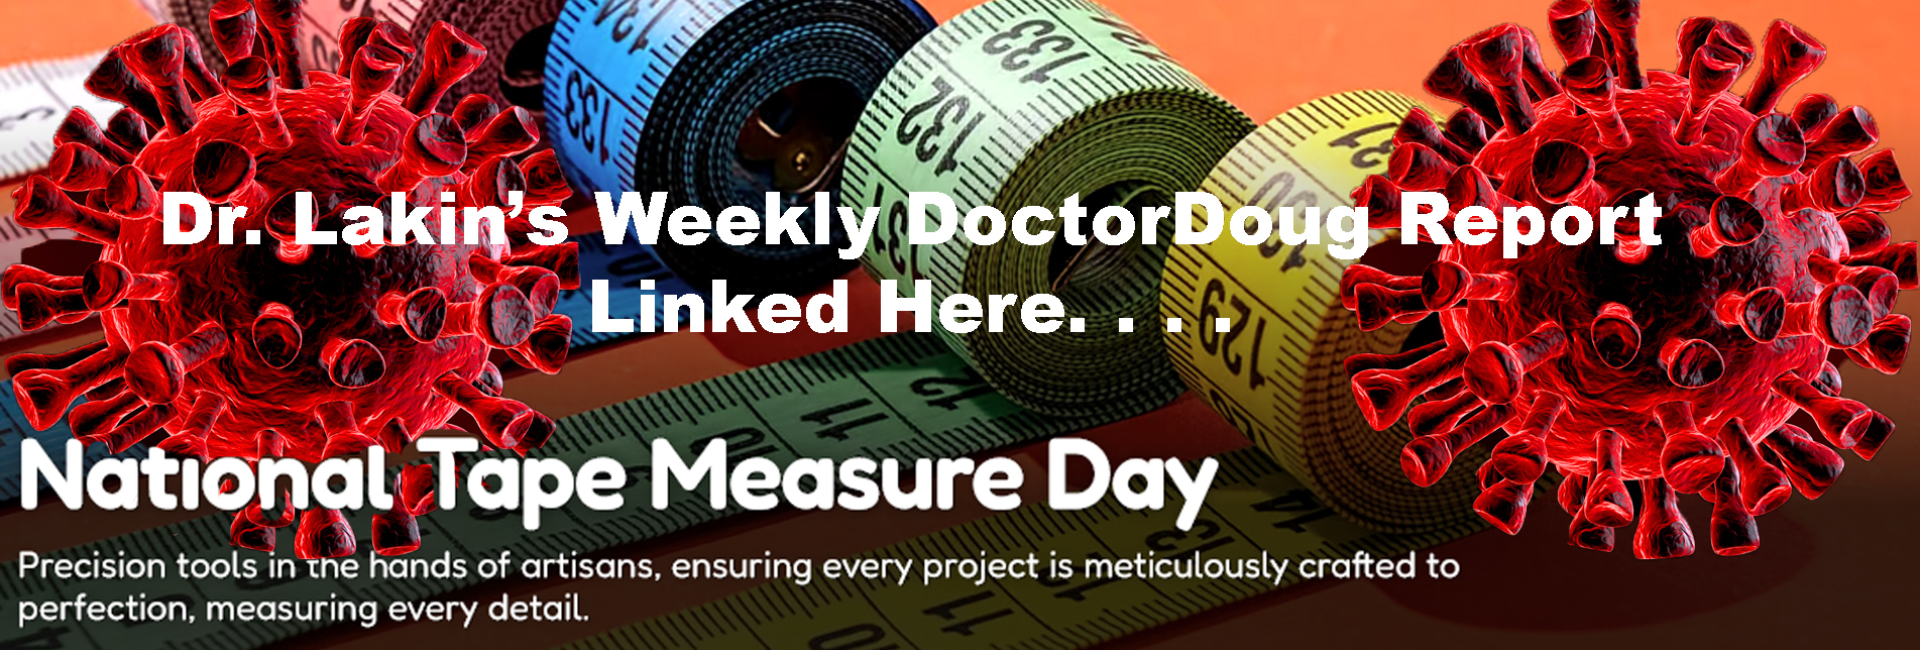 Information For Our Patients: 'The Weekly DoctorDoug Report'